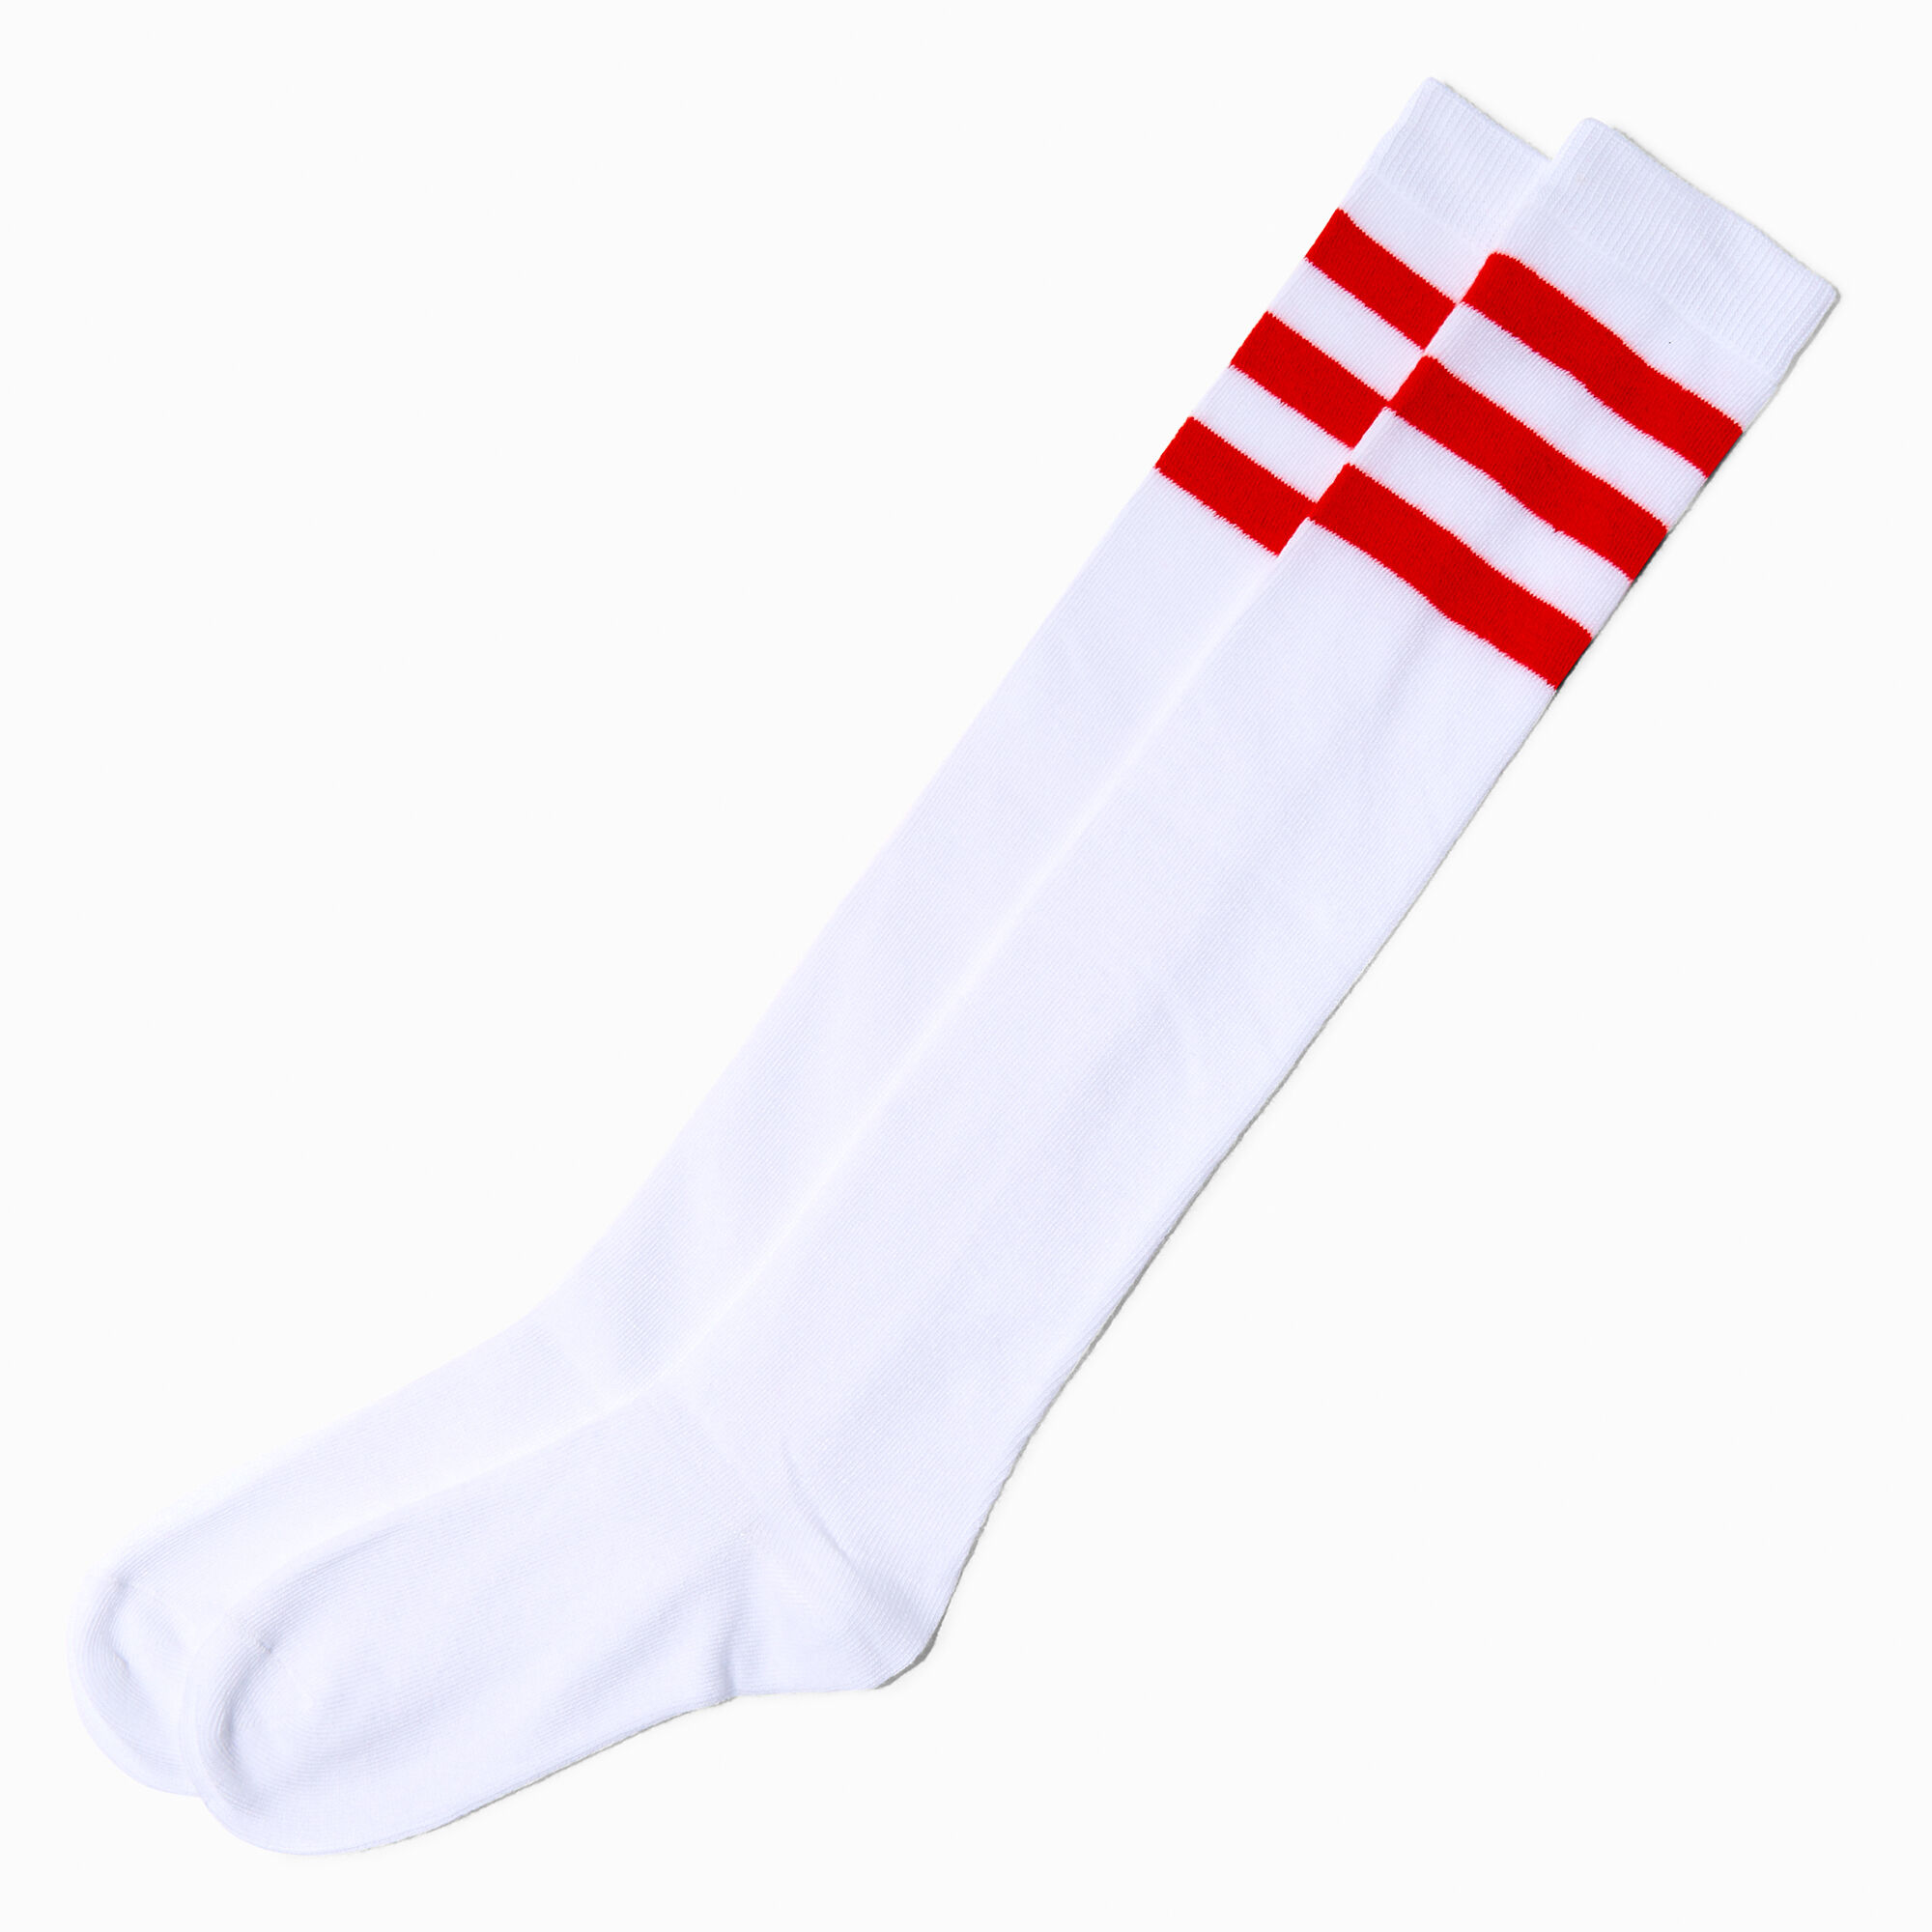 View Claires Stripe Over The Knee Socks Red information